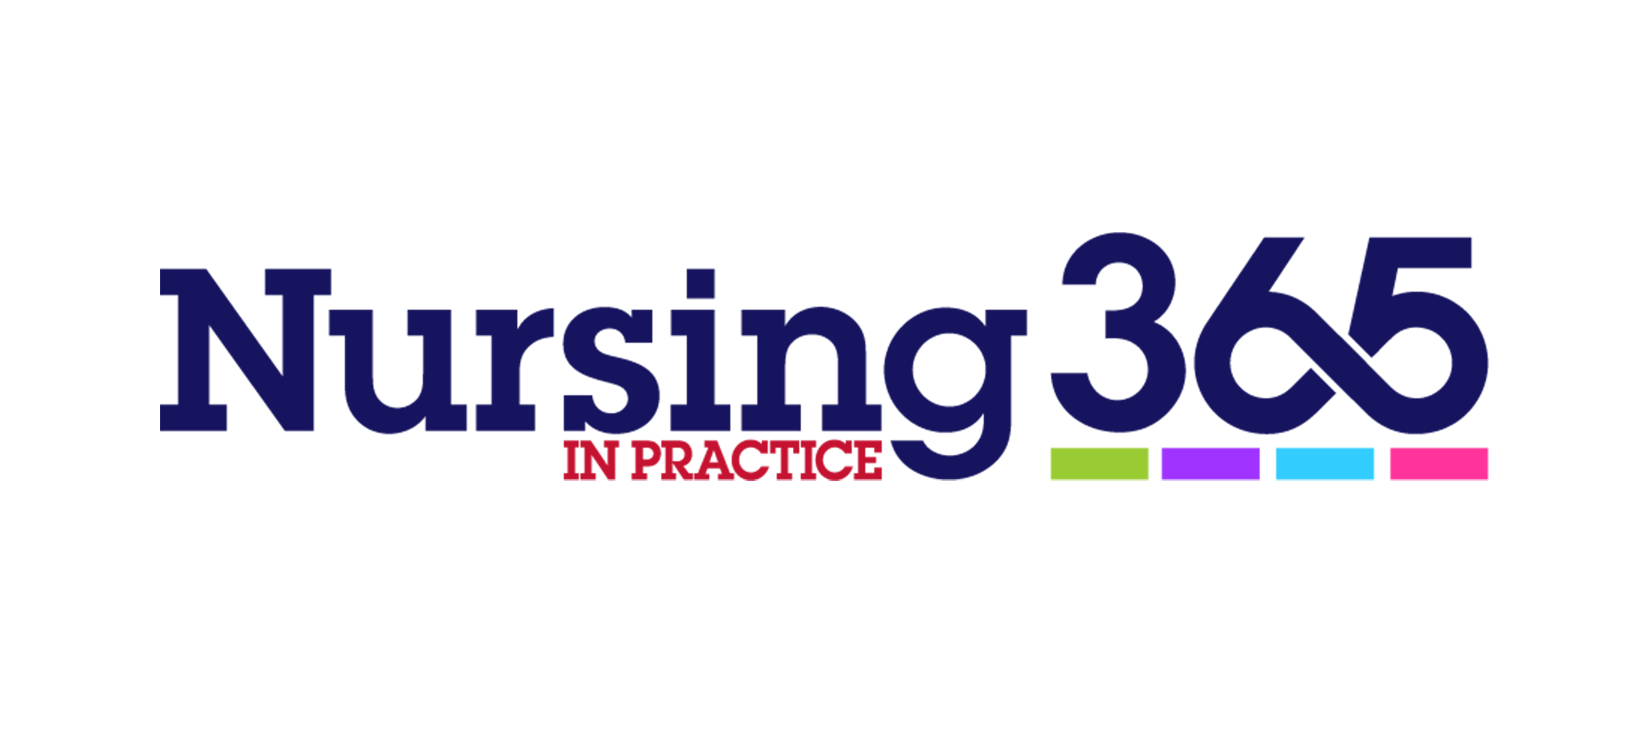 Nursing in Practice 365 – what’s it all about?